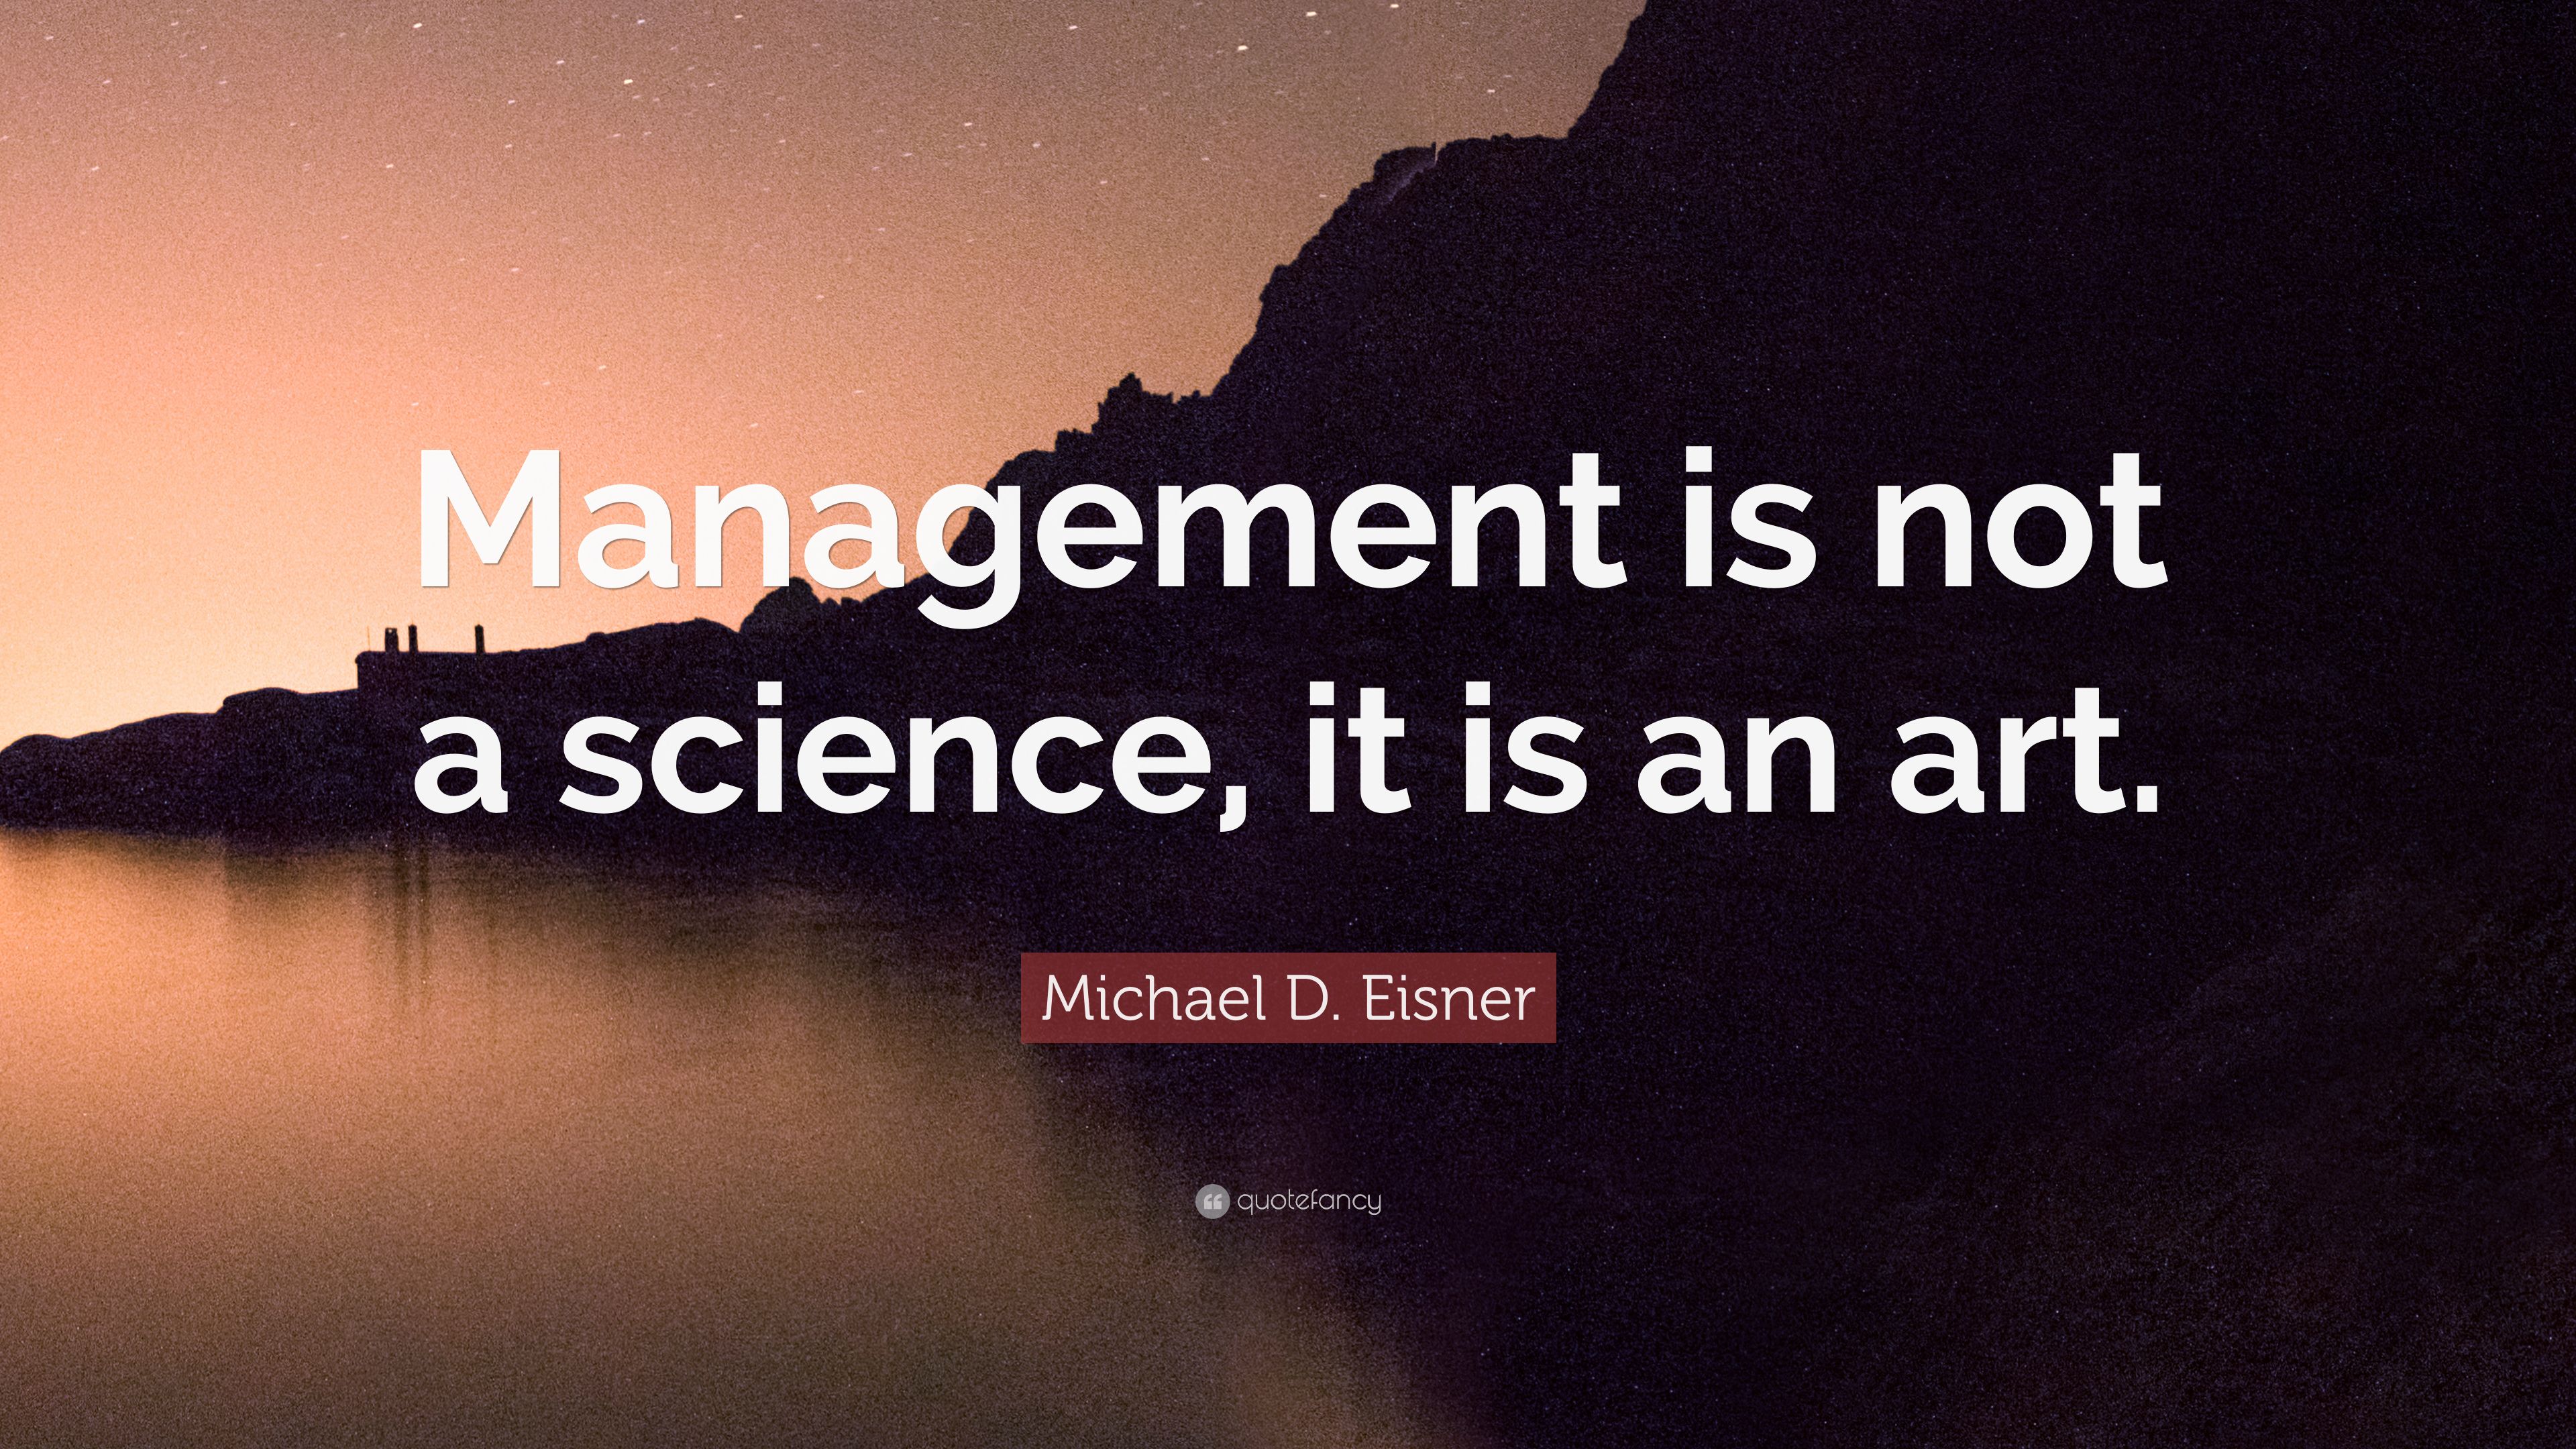 Michael D. Eisner Quote: “Management is not a science, it is an